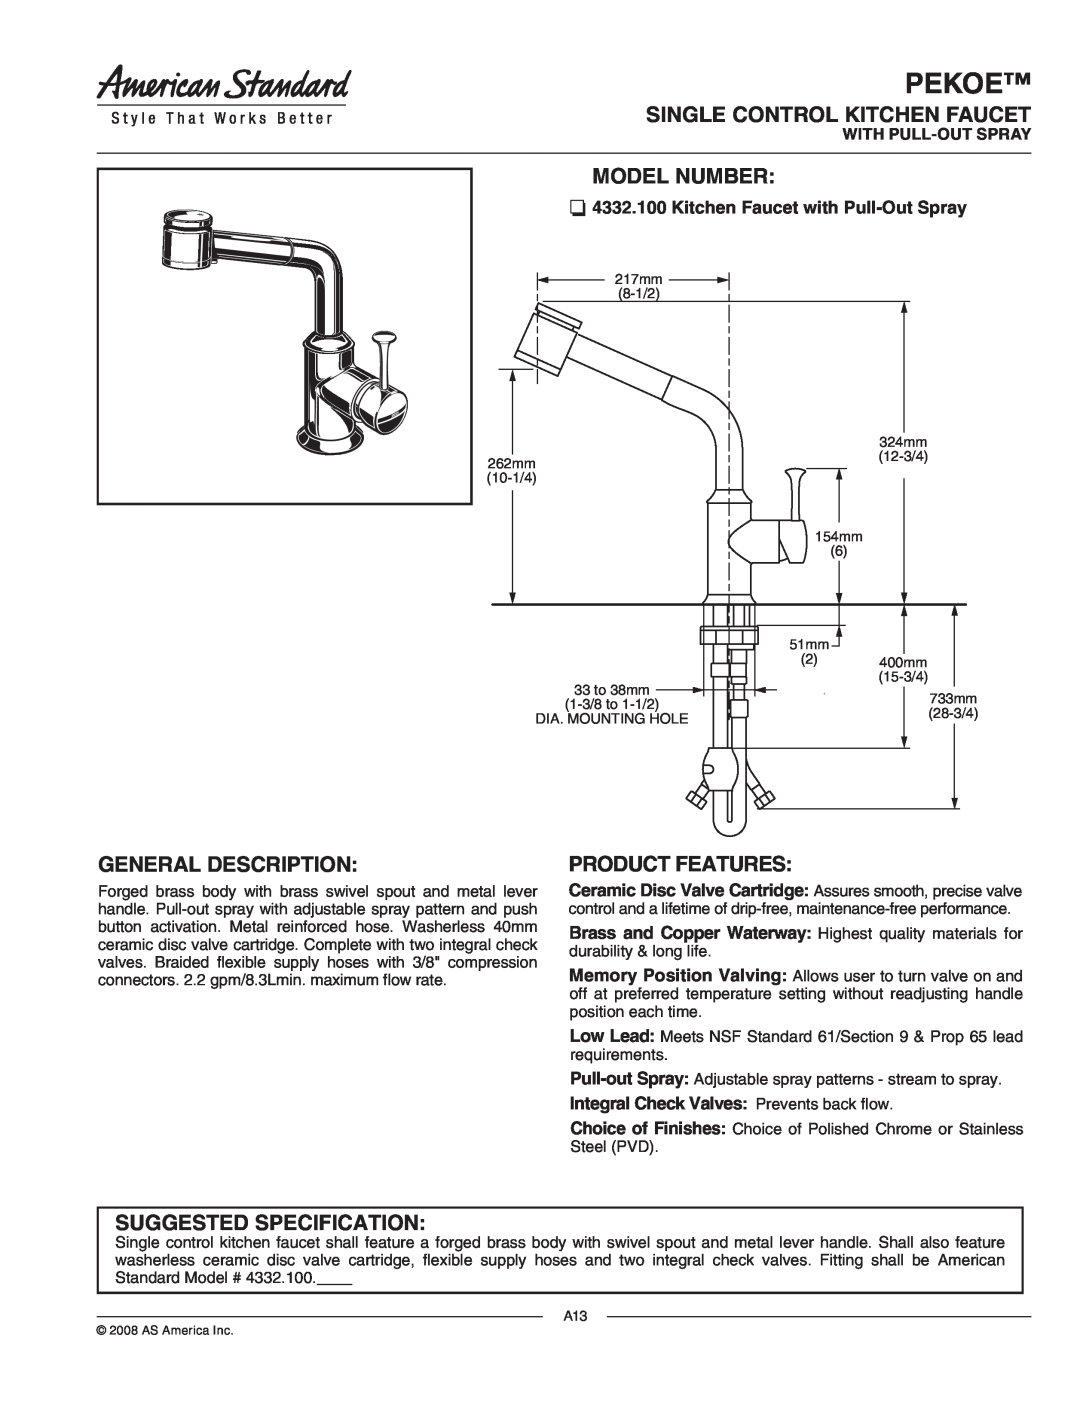 American Standard 4332.100 specifications Pekoe, Kitchen Faucet with Pull-OutSpray, With Pull-Outspray, Model Number 